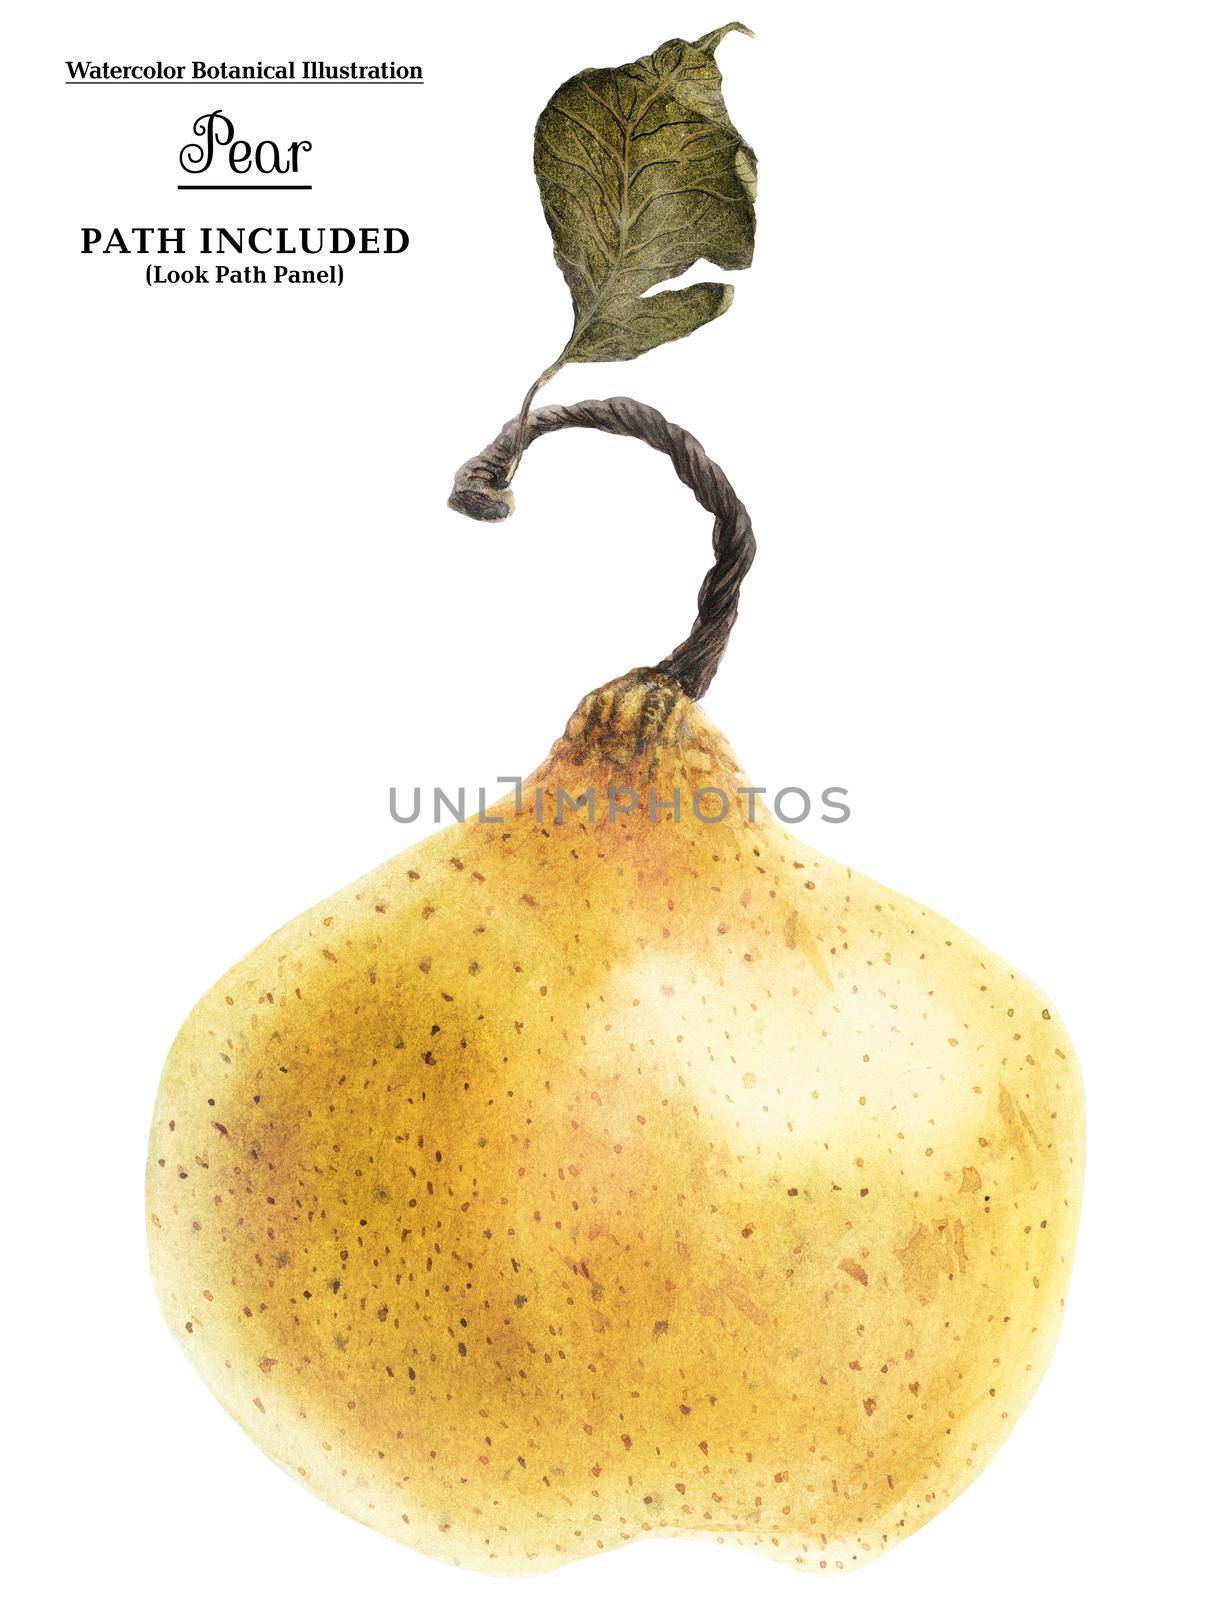 Watercolor illustration. Fat Fresh Yellow Summer Pear by Xeniasnowstorm